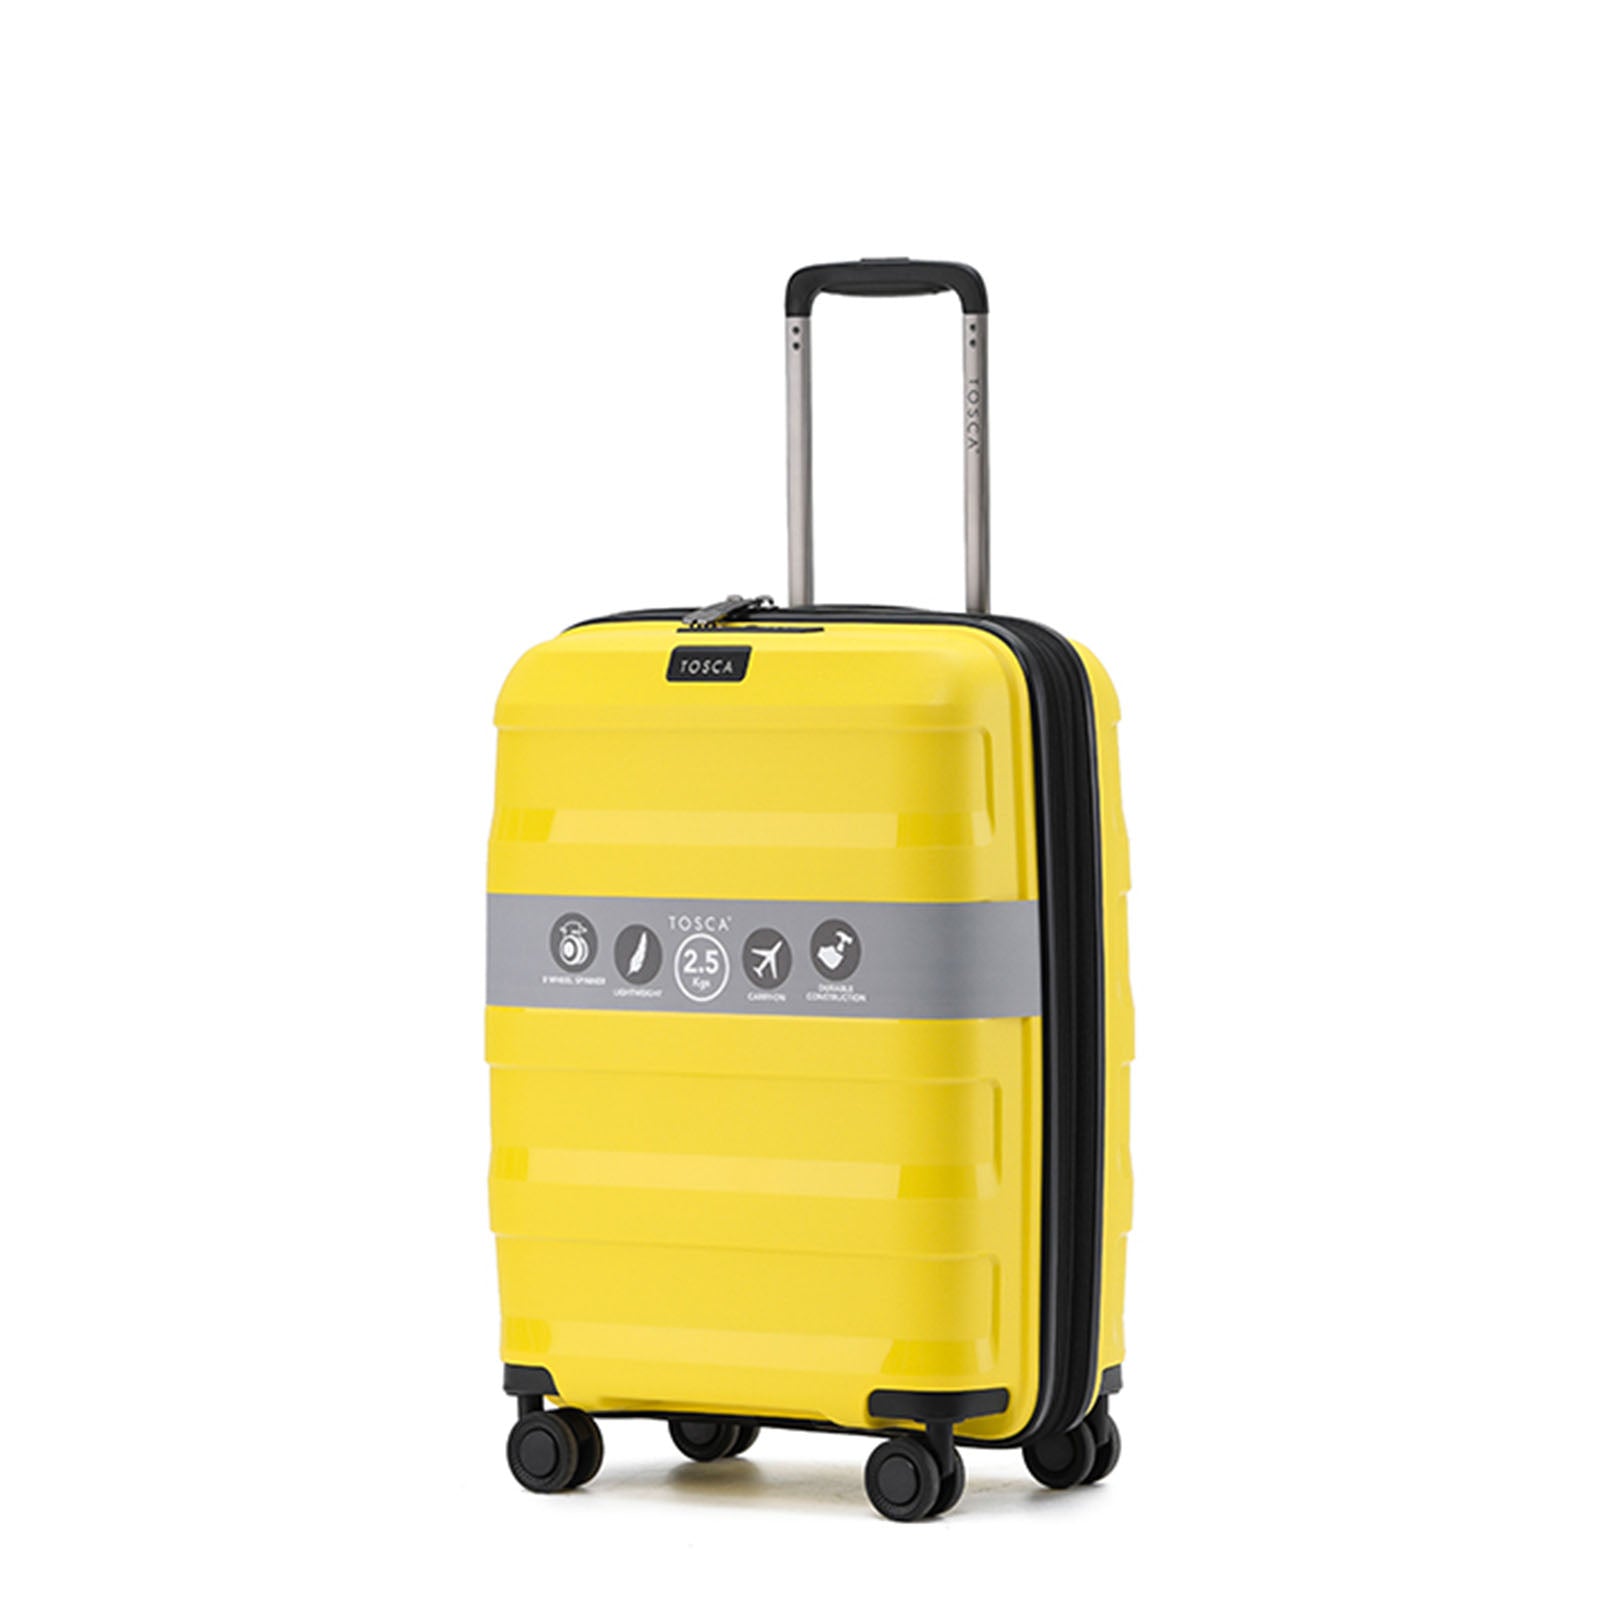 Tosca-Comet-4-Wheel-55cm-Carry-On-Suitcase-Yellow-Front-Angle